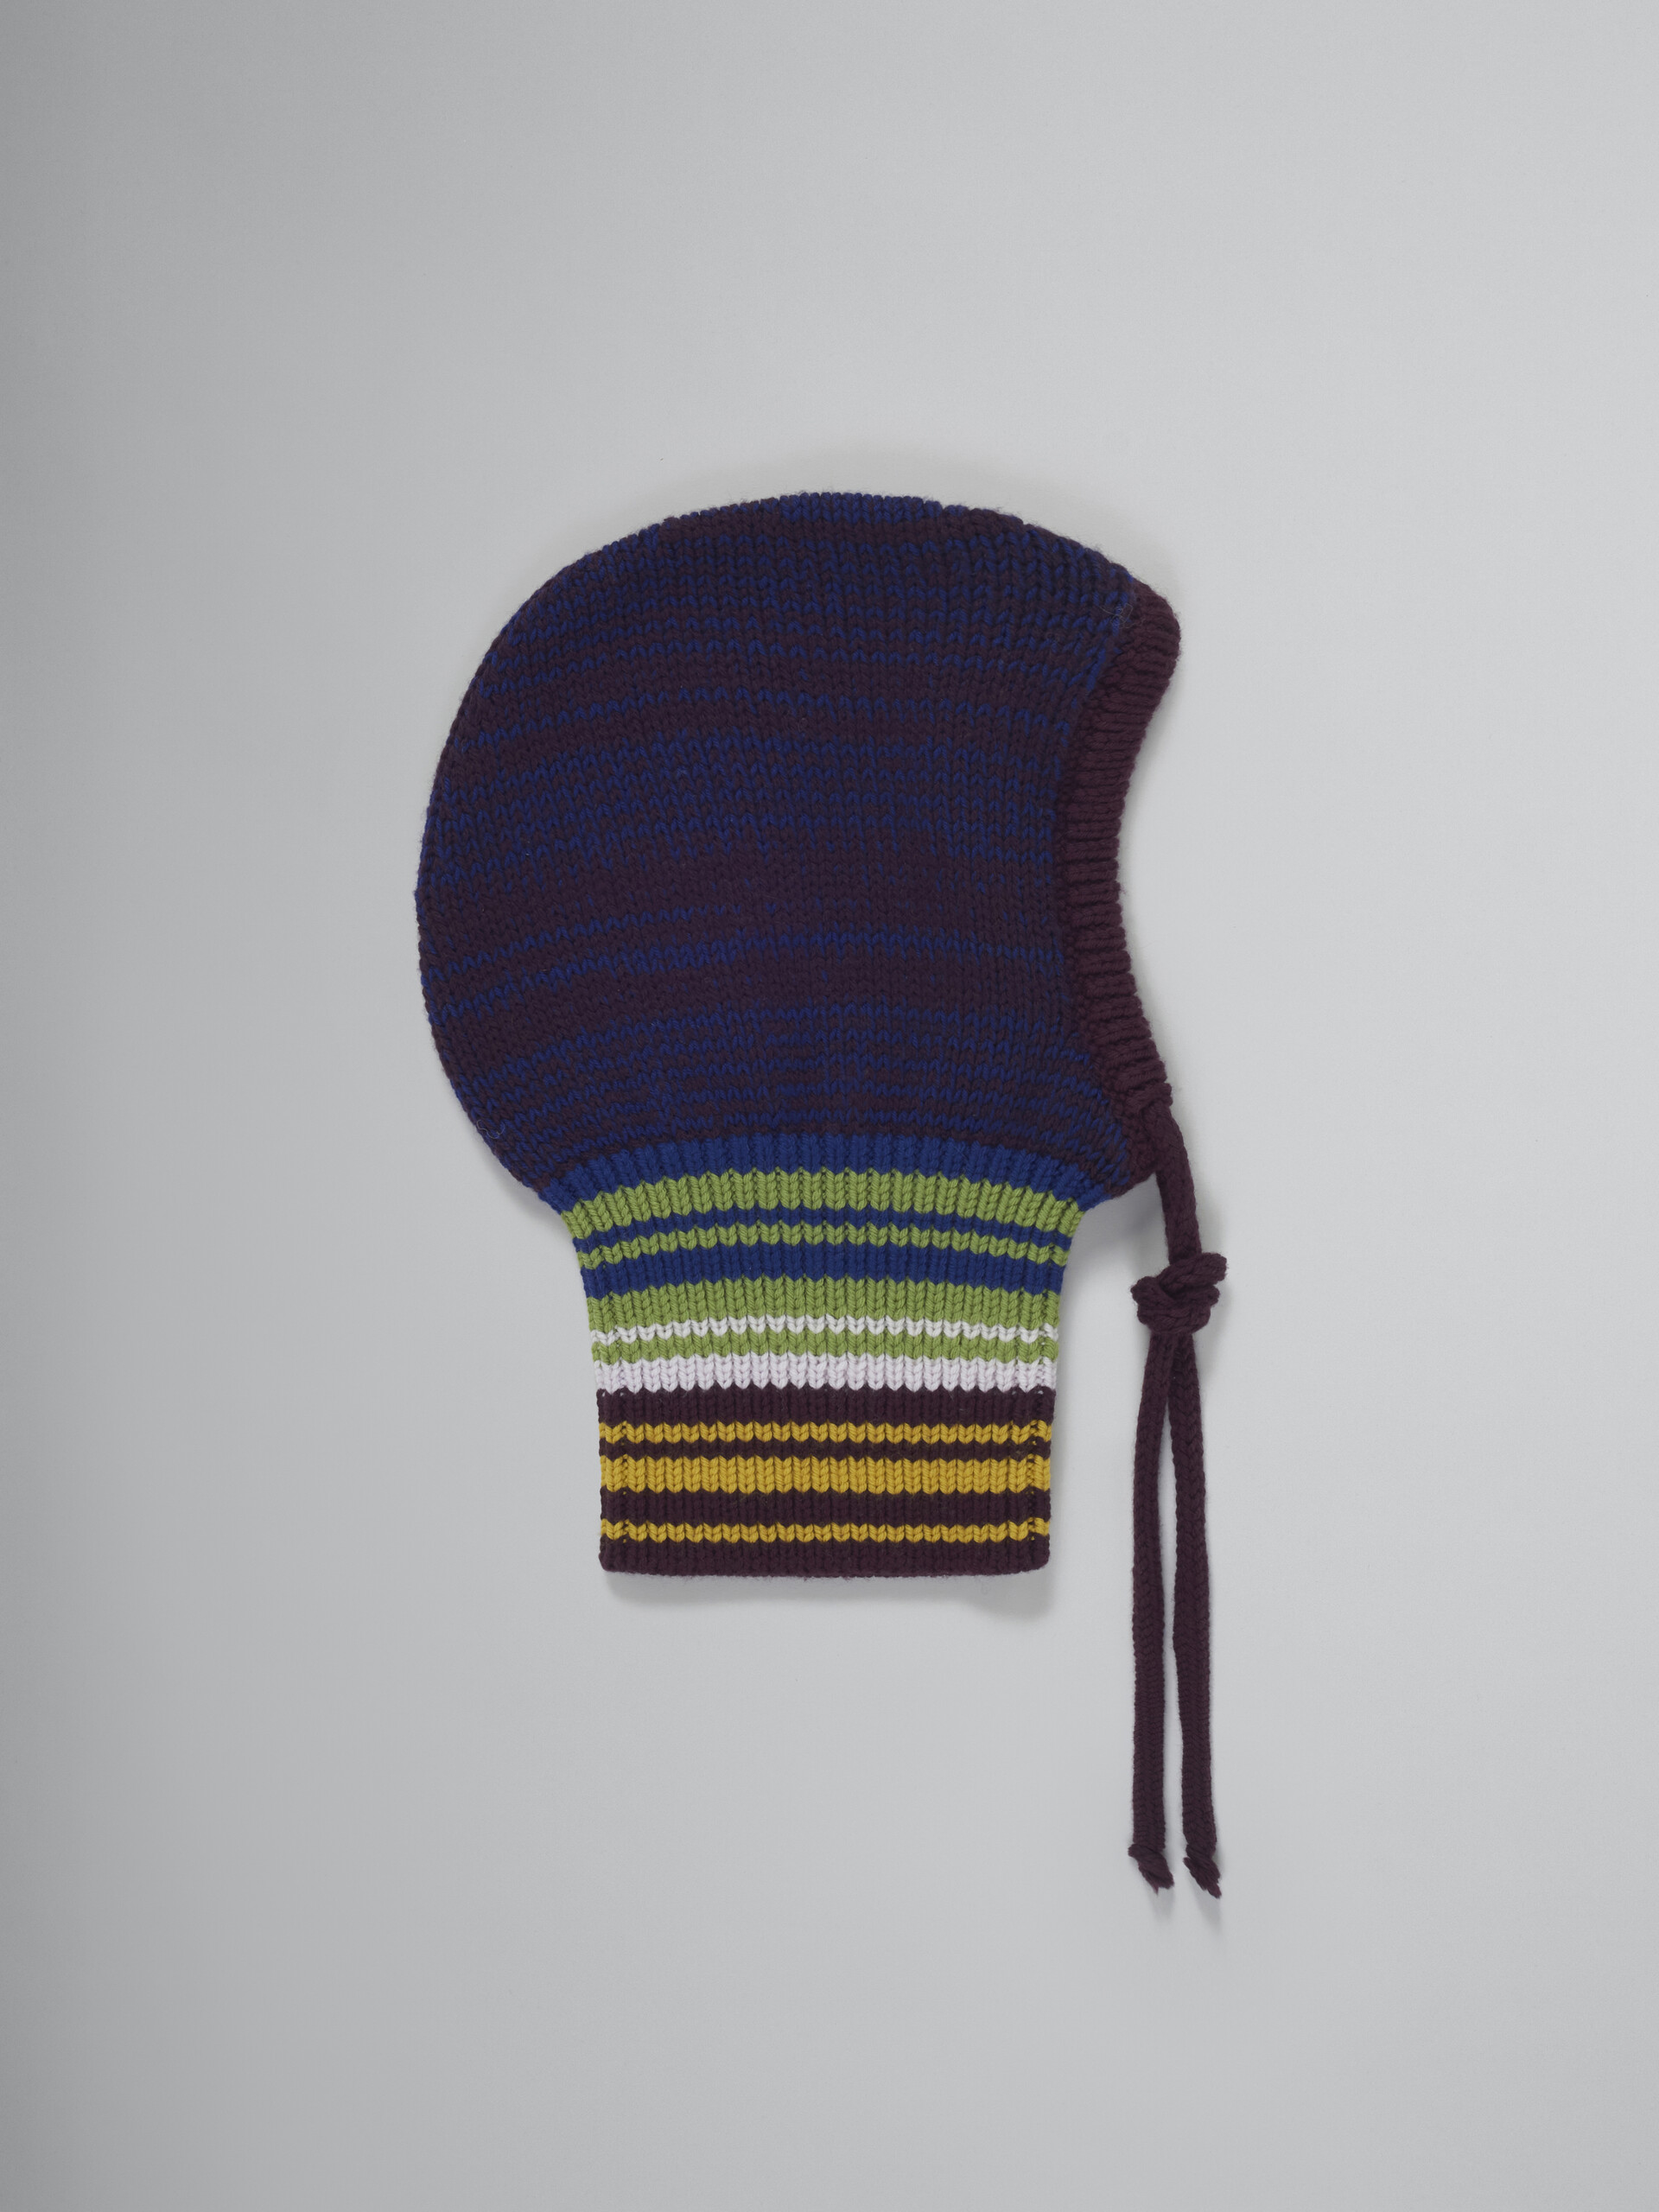 Blue mouliné balaclava with striped neck - Other accessories - Image 1